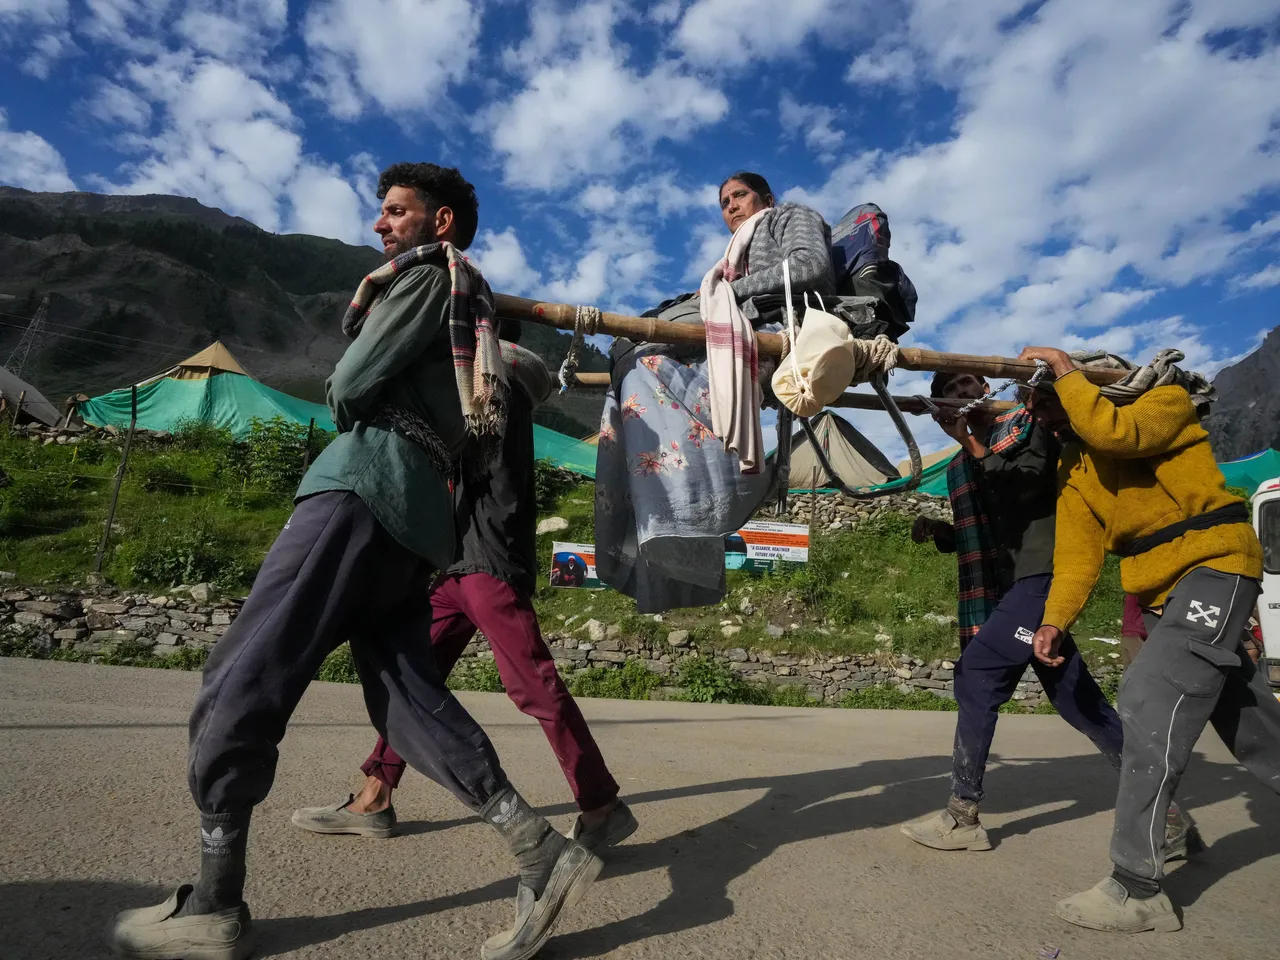 Porters carry an Amarnath yatri on a palanquin to the shrine temple from the base camp, in Baltal